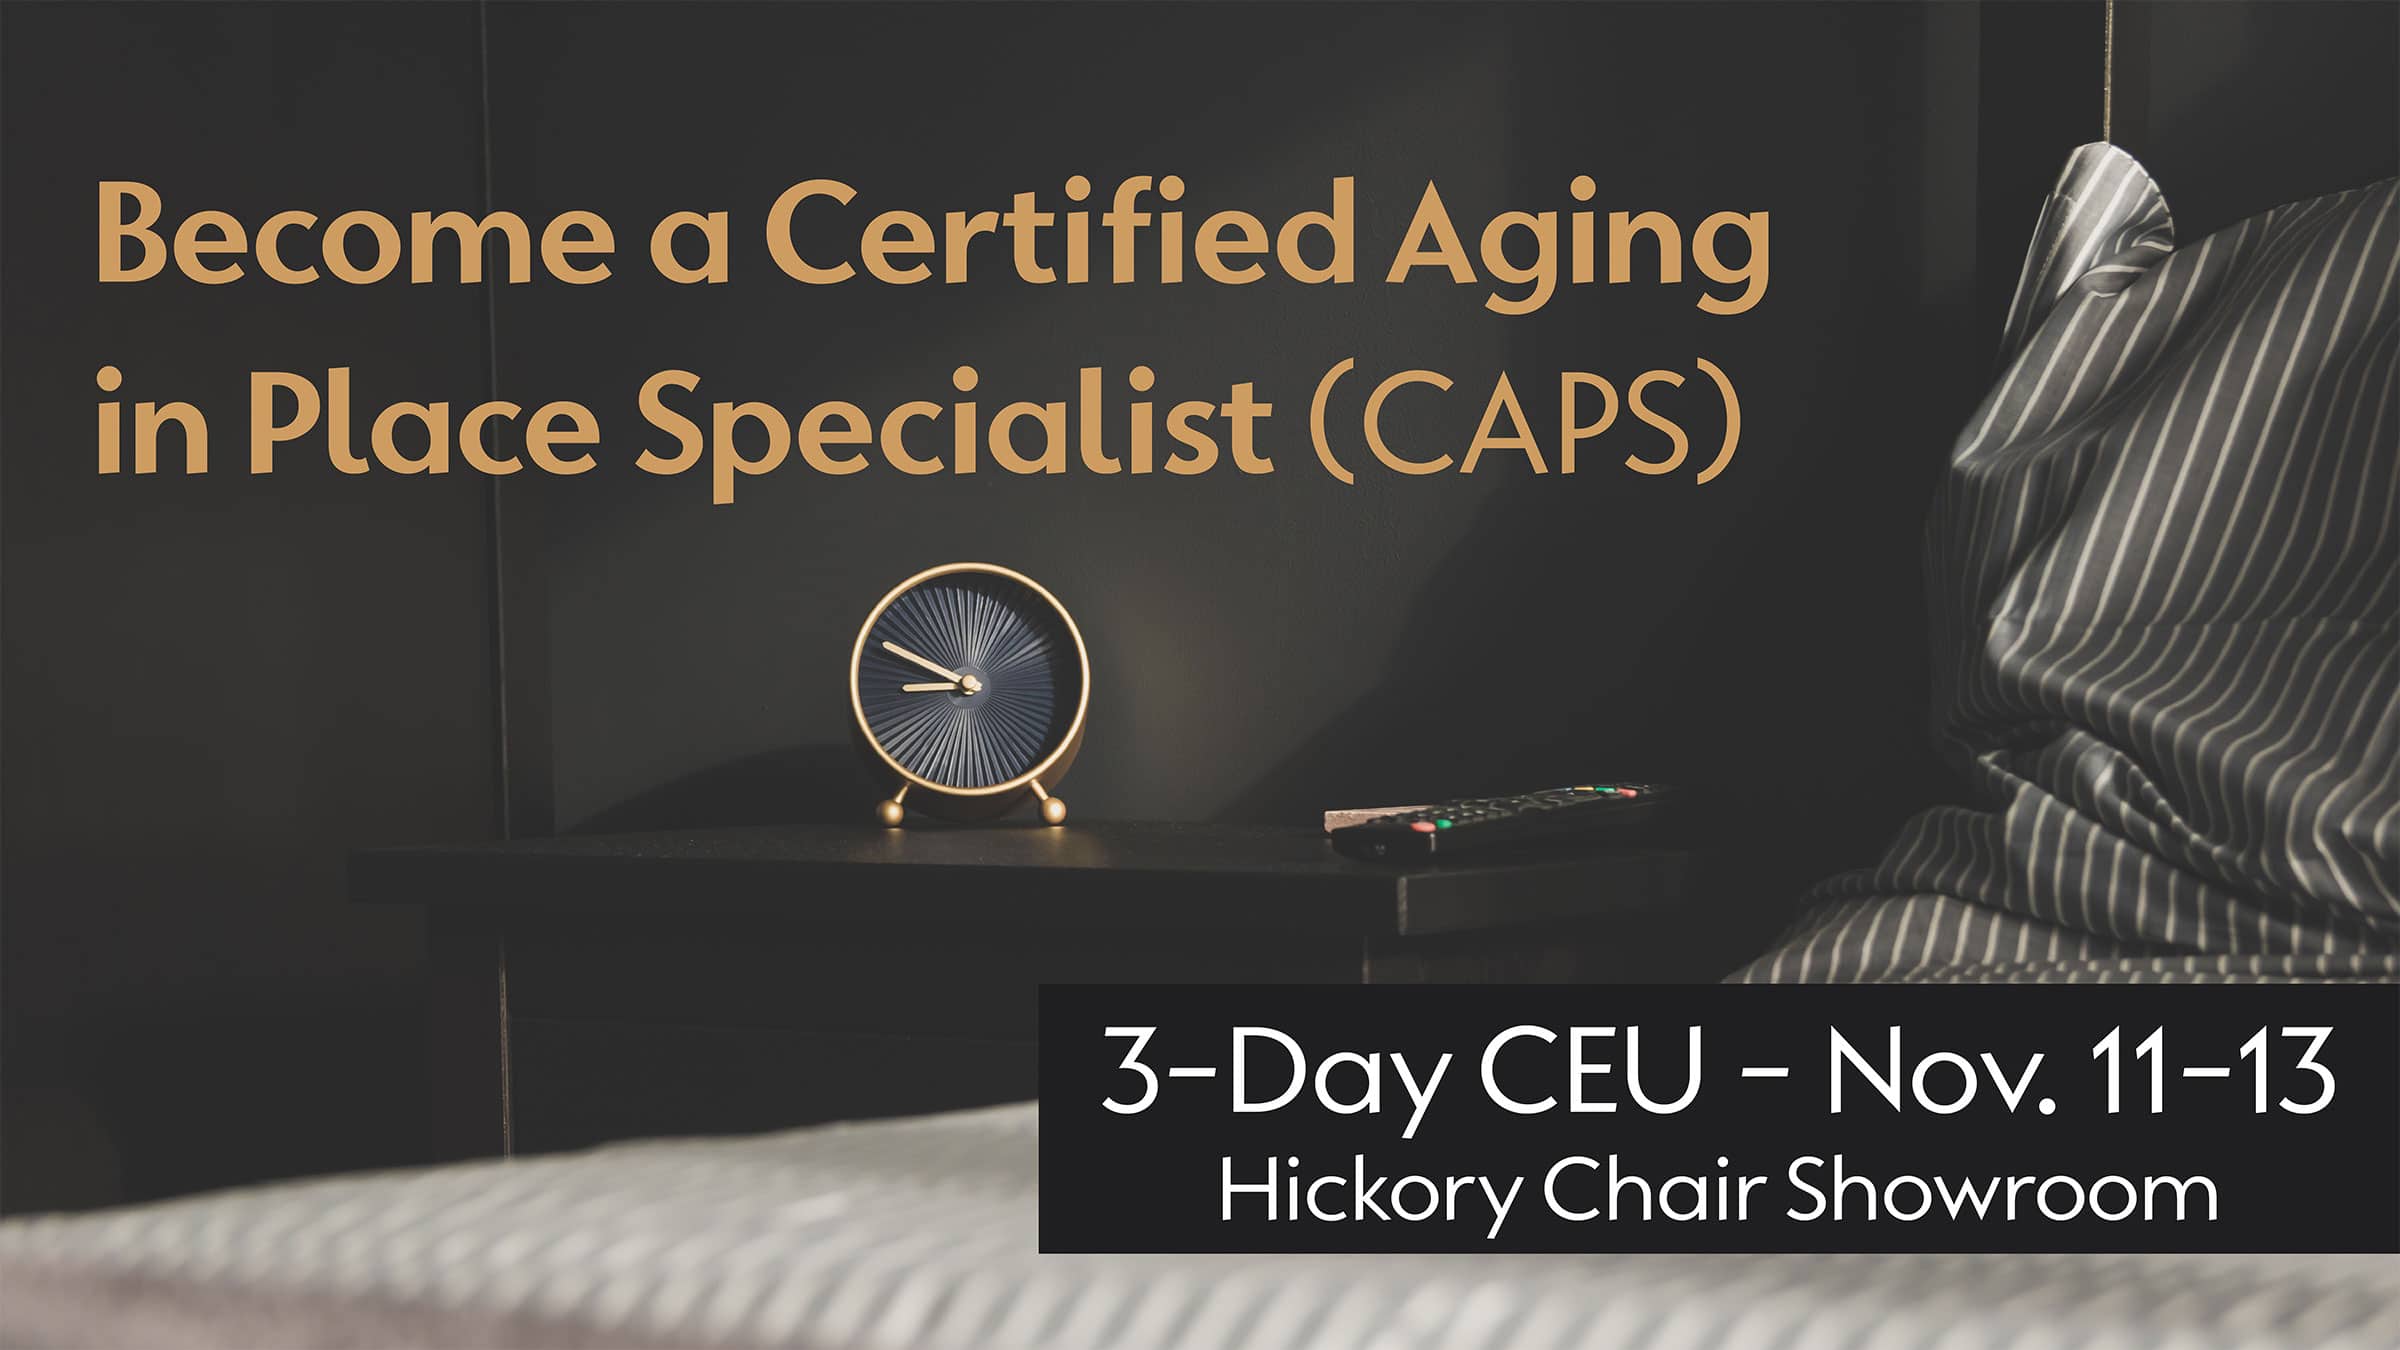 Aging In Place Specialist 3-Day CEU Course at IDS Hickory Chair Showroom November 11-13, 2019.